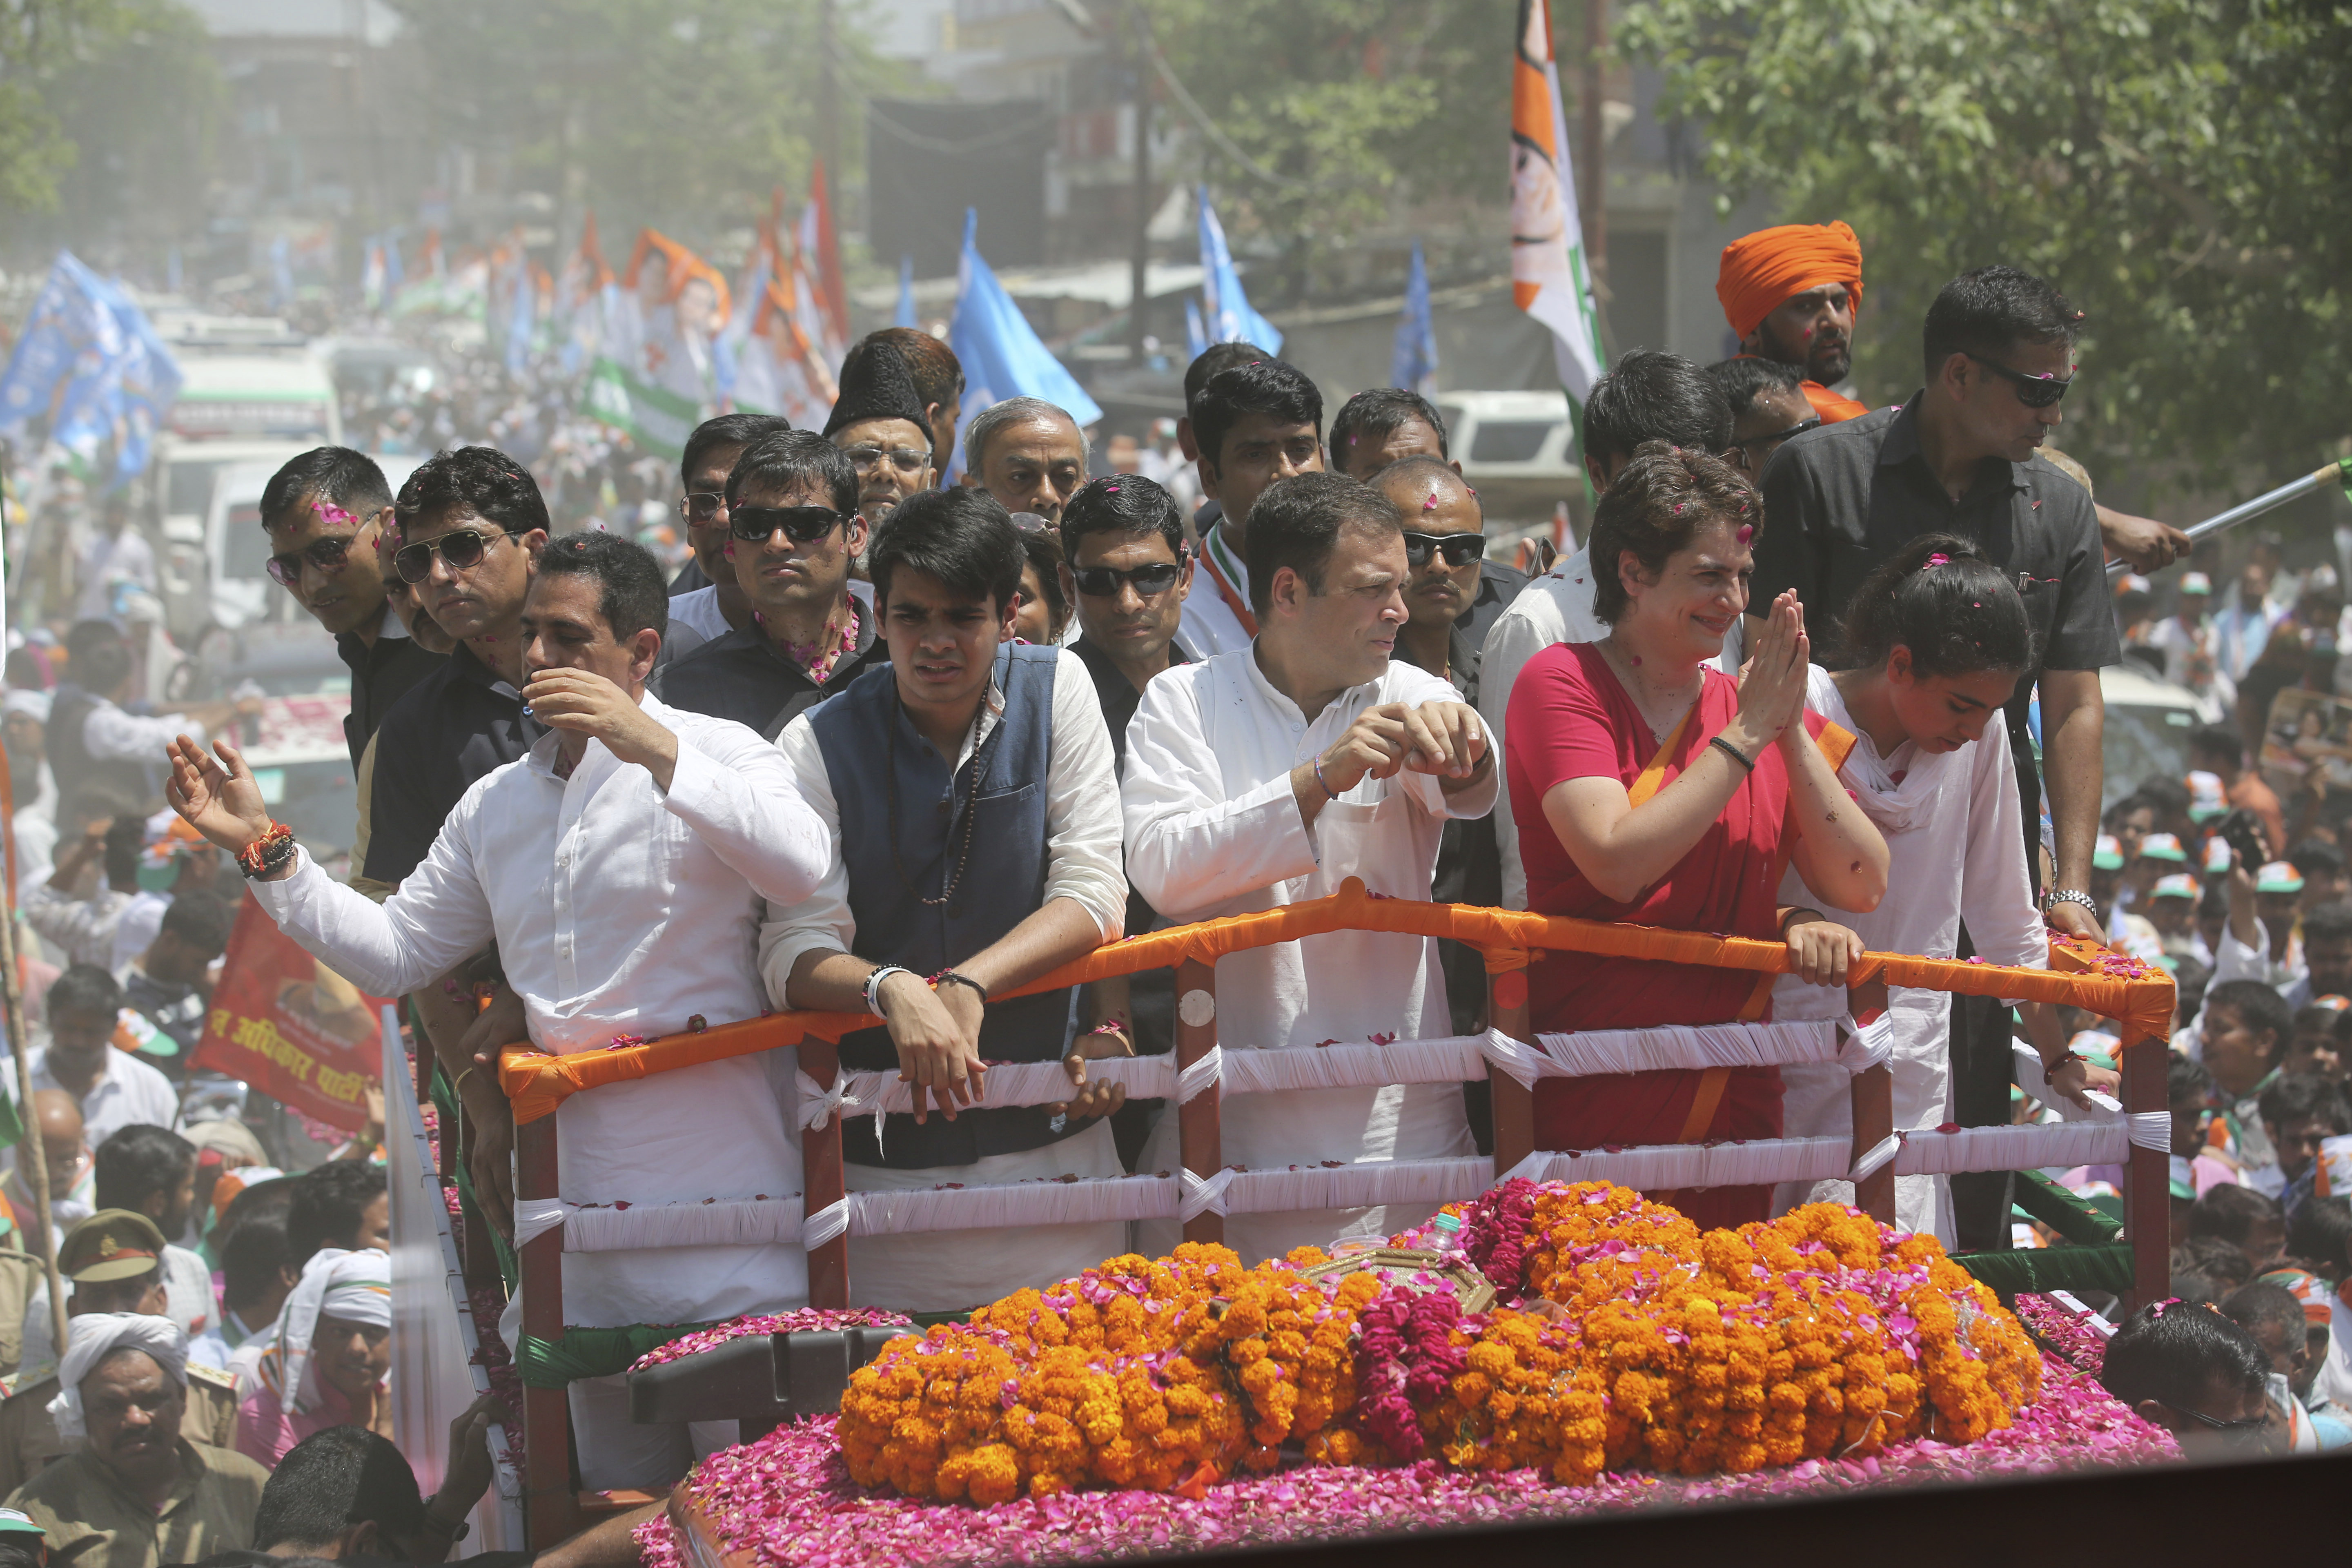 Congress party chief Rahul Gandhi, center in white, accompanied by his sister Priyanka Vadra in red arrives to file his nomination papers for the upcoming general elections in Amethi, Uttar Pradesh - AP